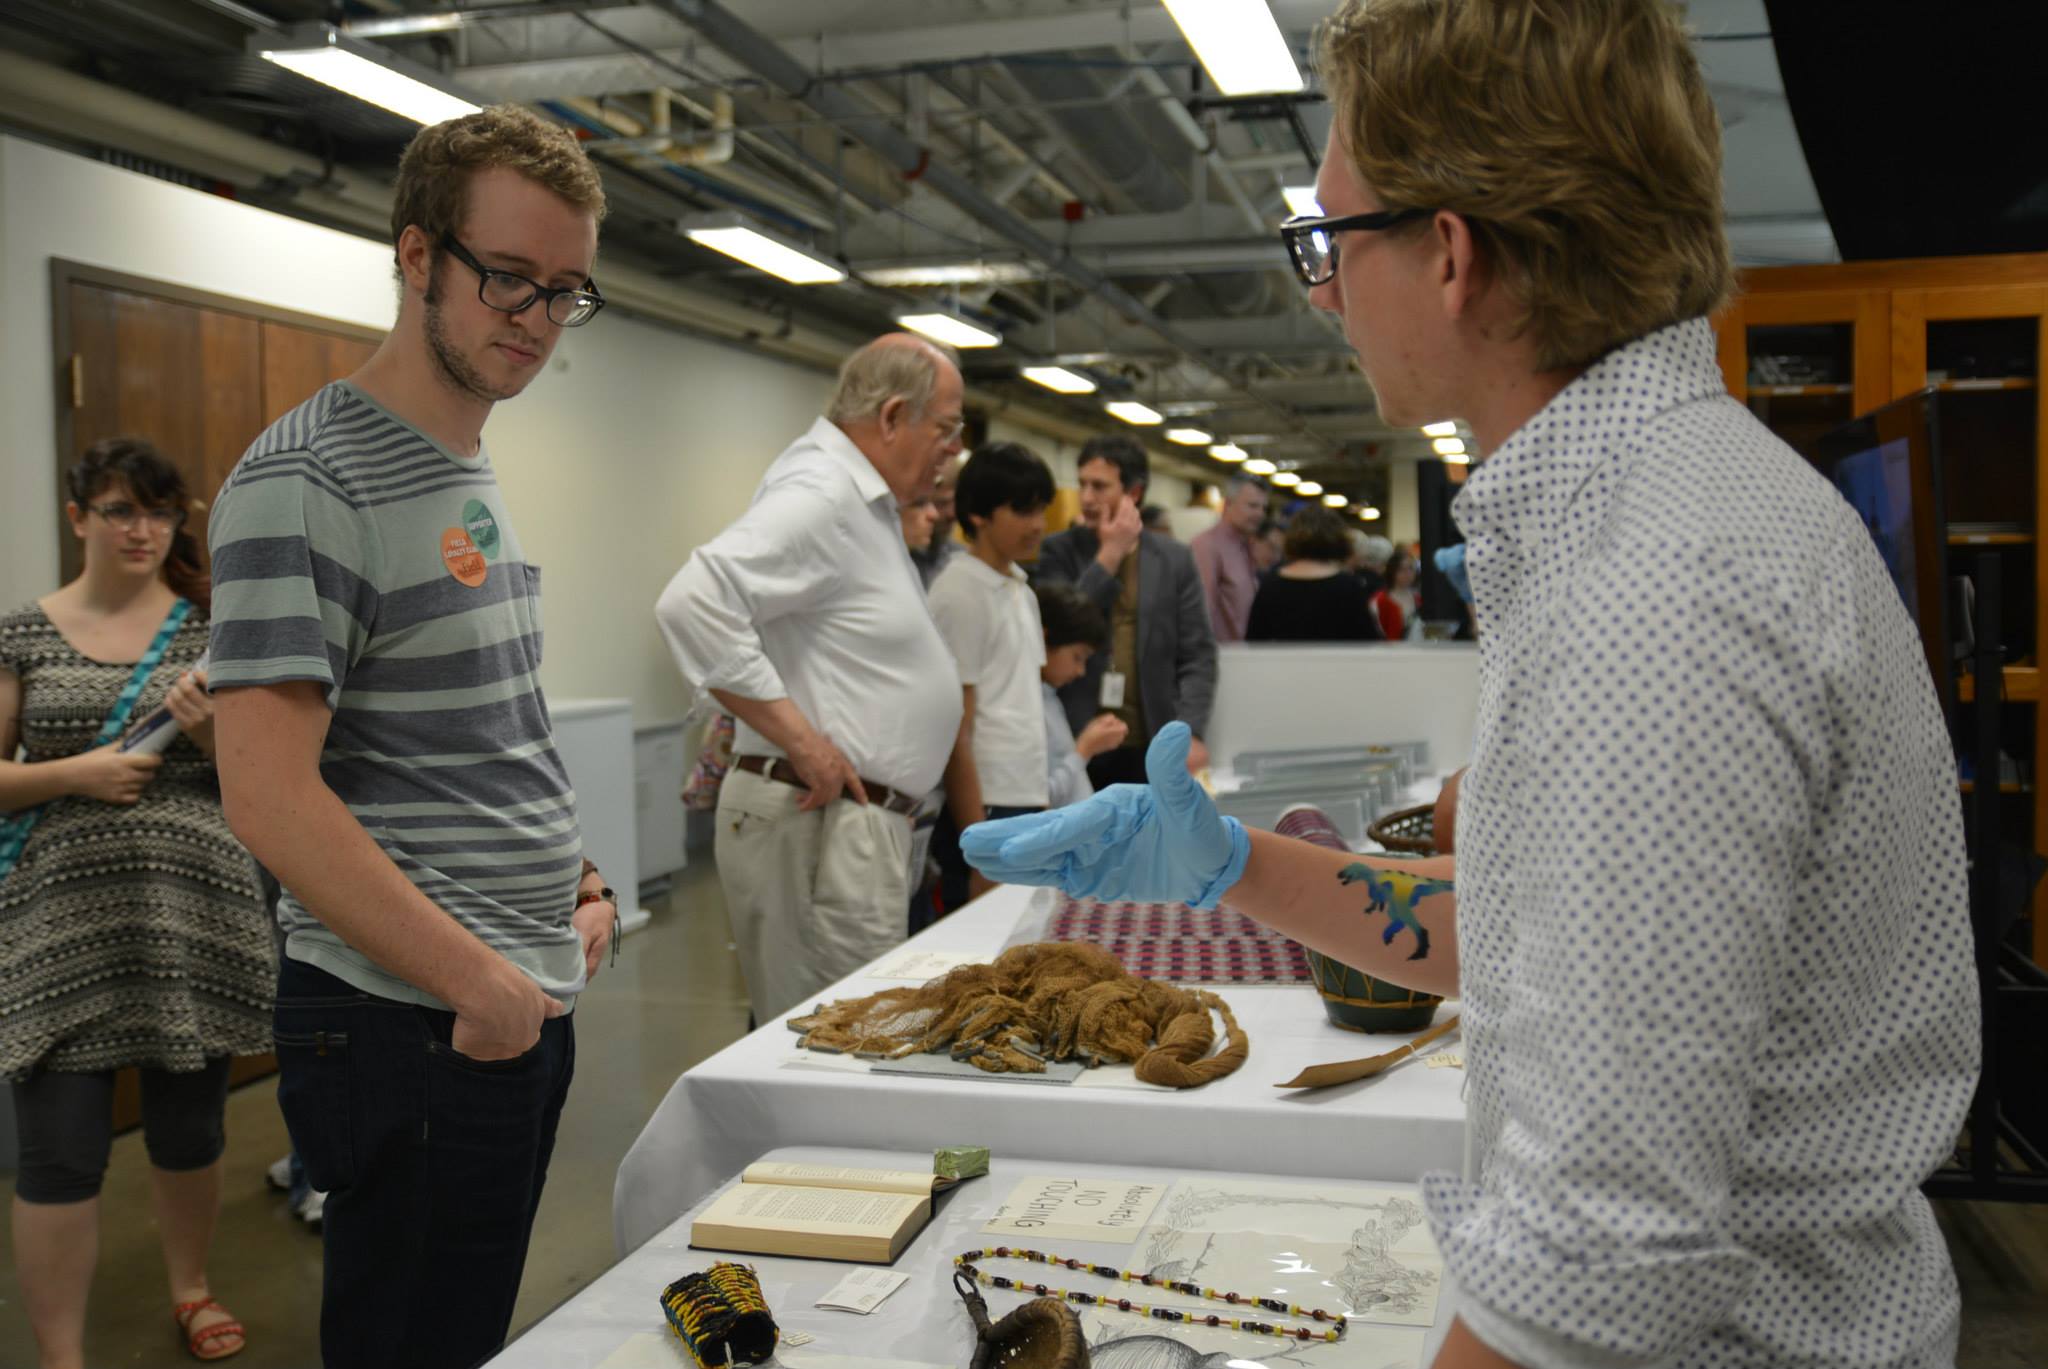 Joe answers guests' questions about the artifacts on display. (c) Field Museum of Natural History - CC BY-NC 4.0